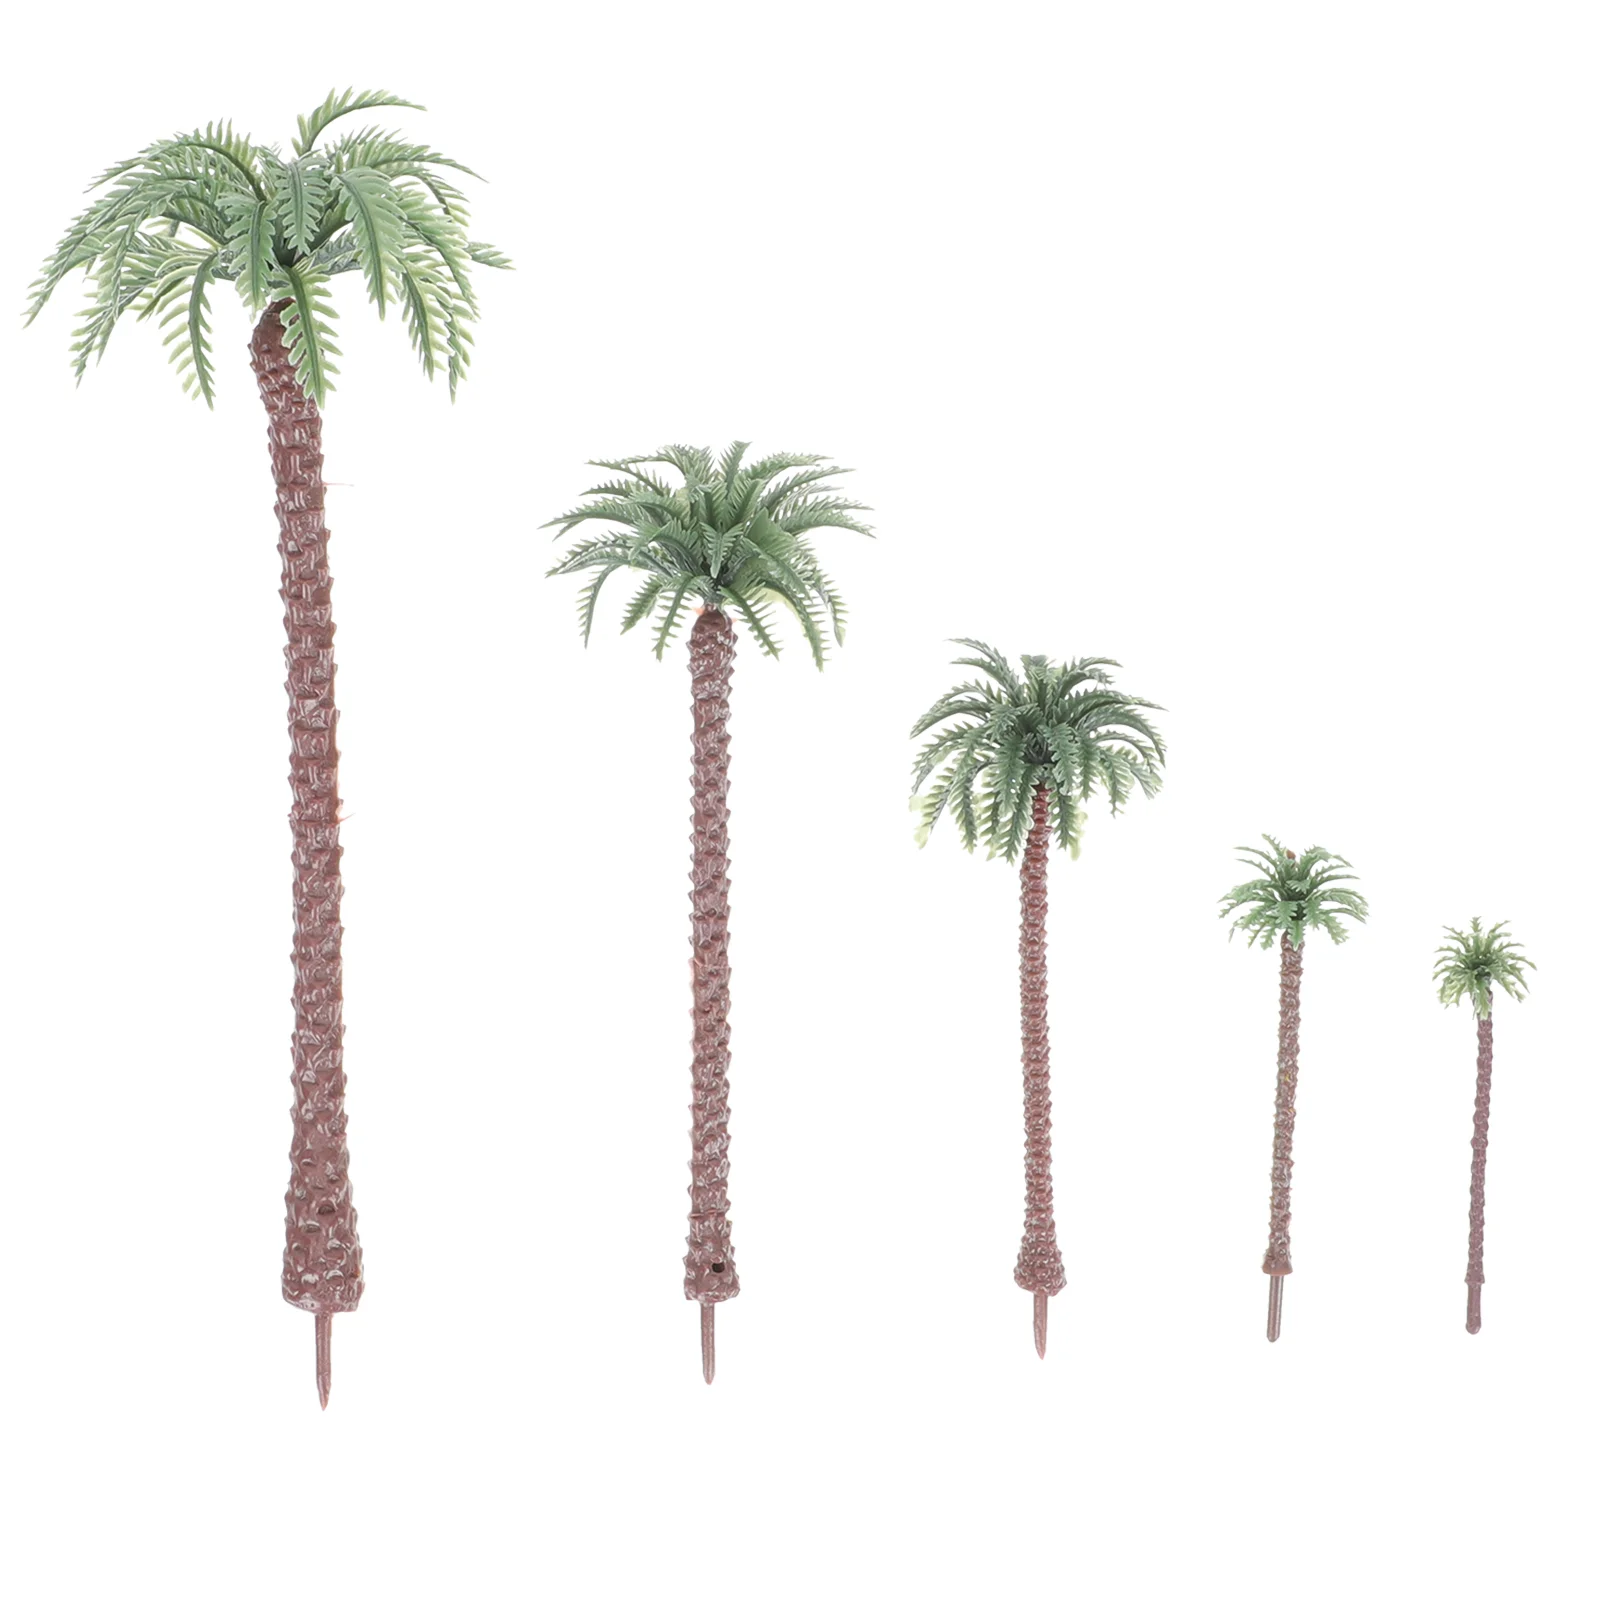 

Tree Palm Trees Mini Model Fake Cupcake Plastic Scenery Toppers Cake Decor Artificial Topper Decorations Crafts Diorama